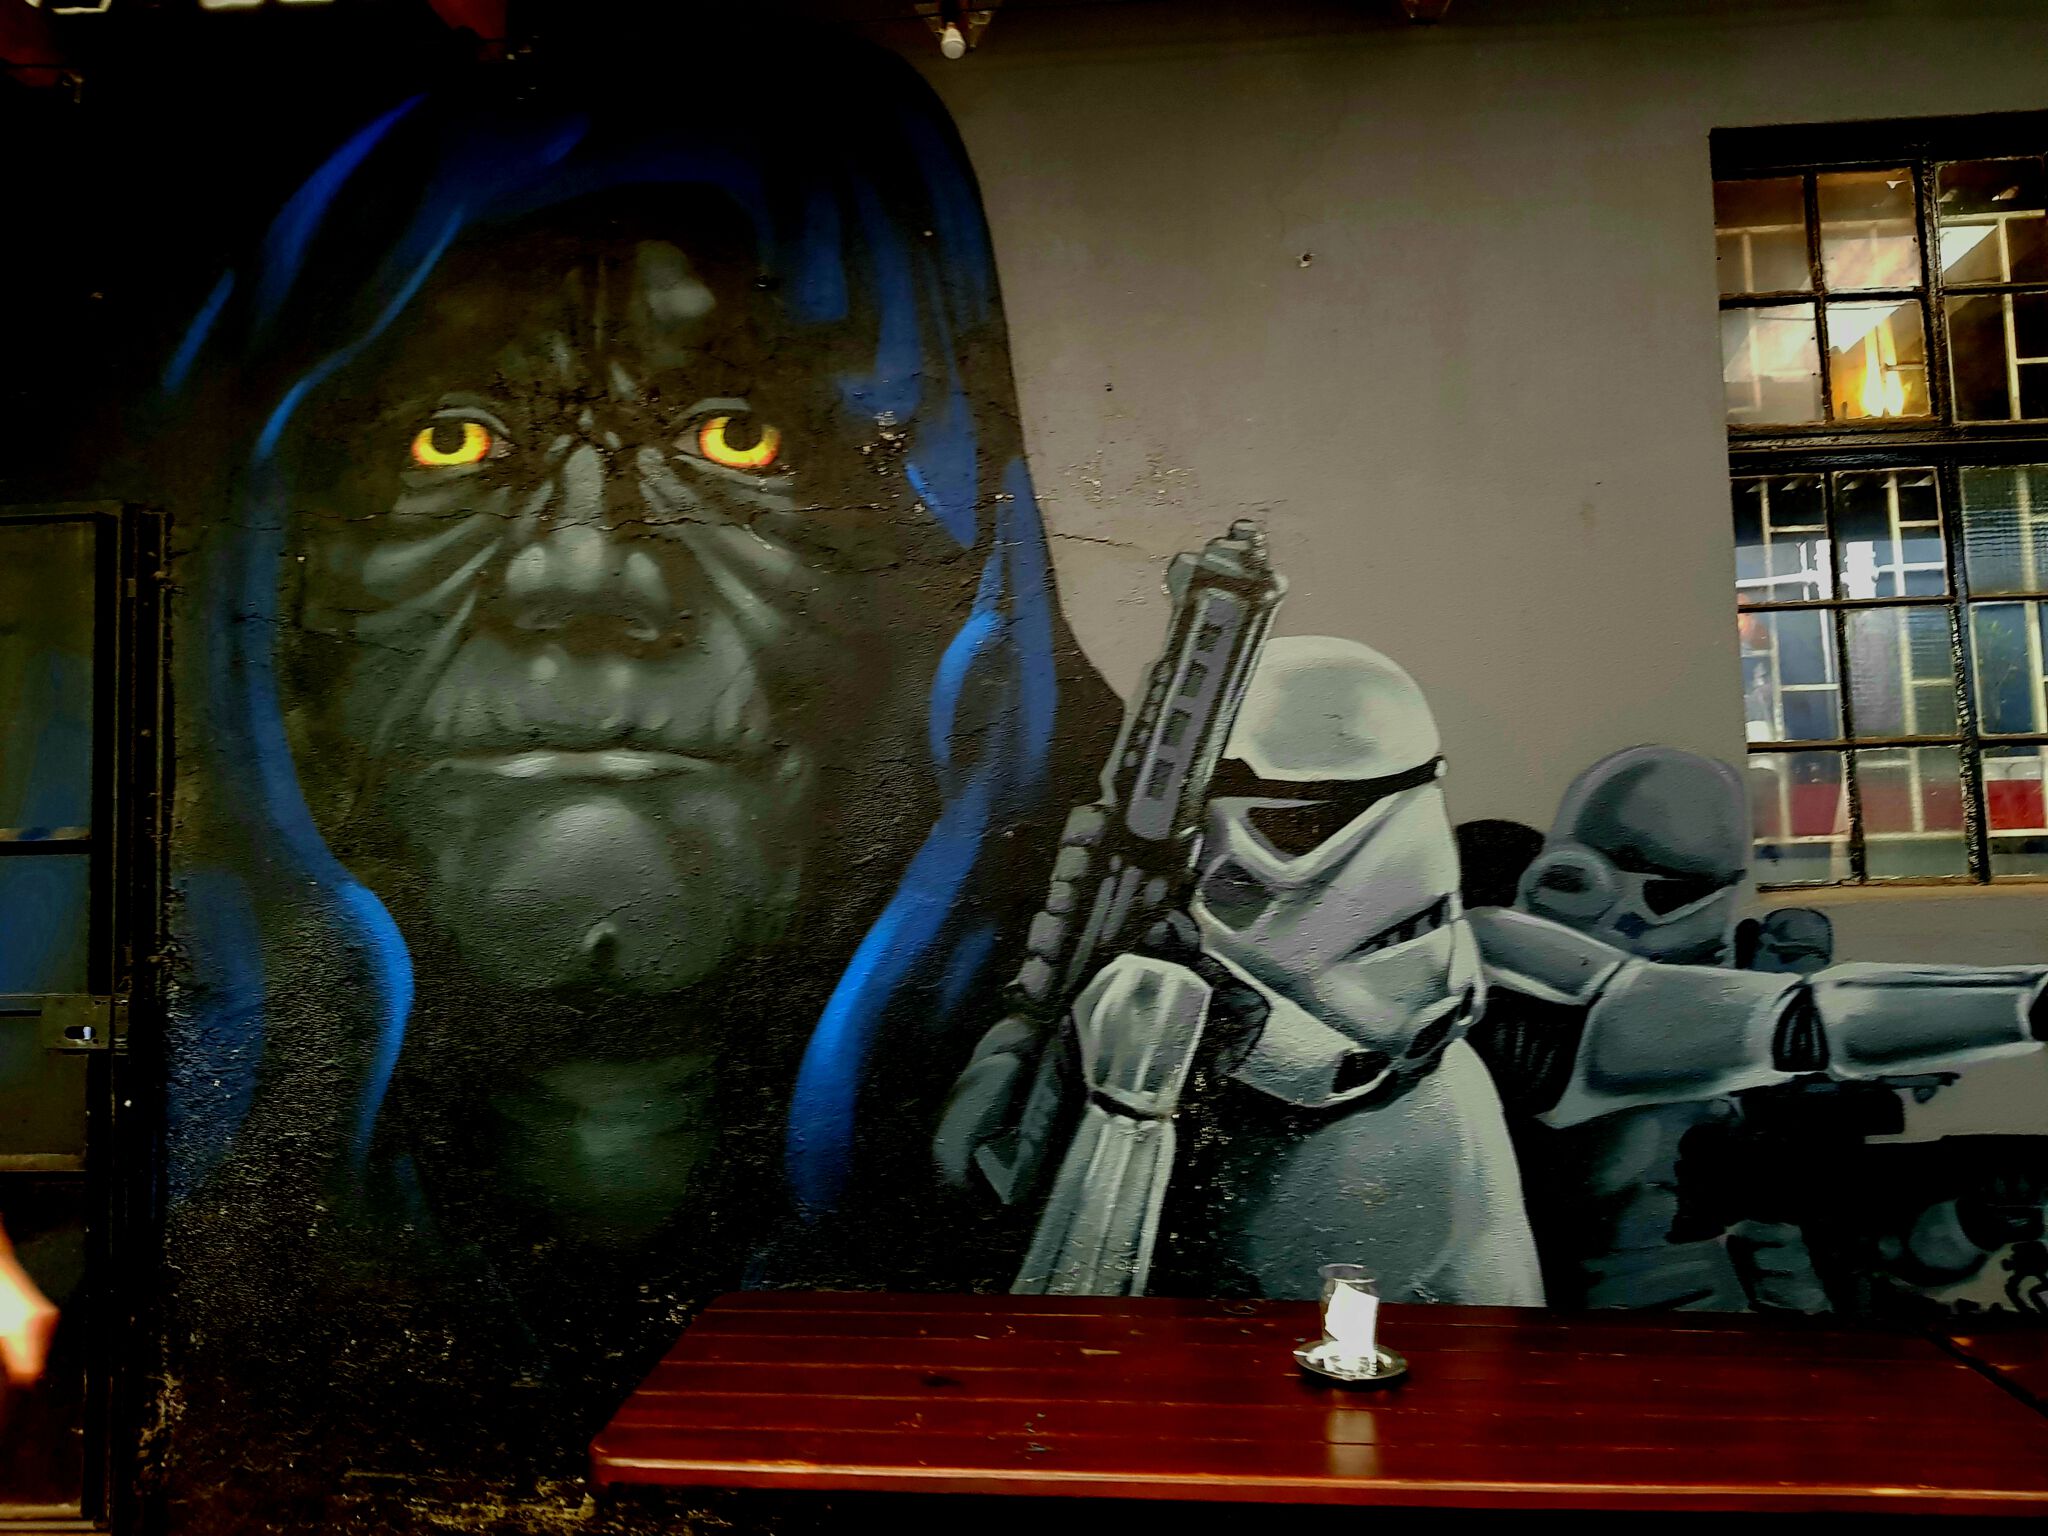 Unknown - Cape Town&mdash;The Sith